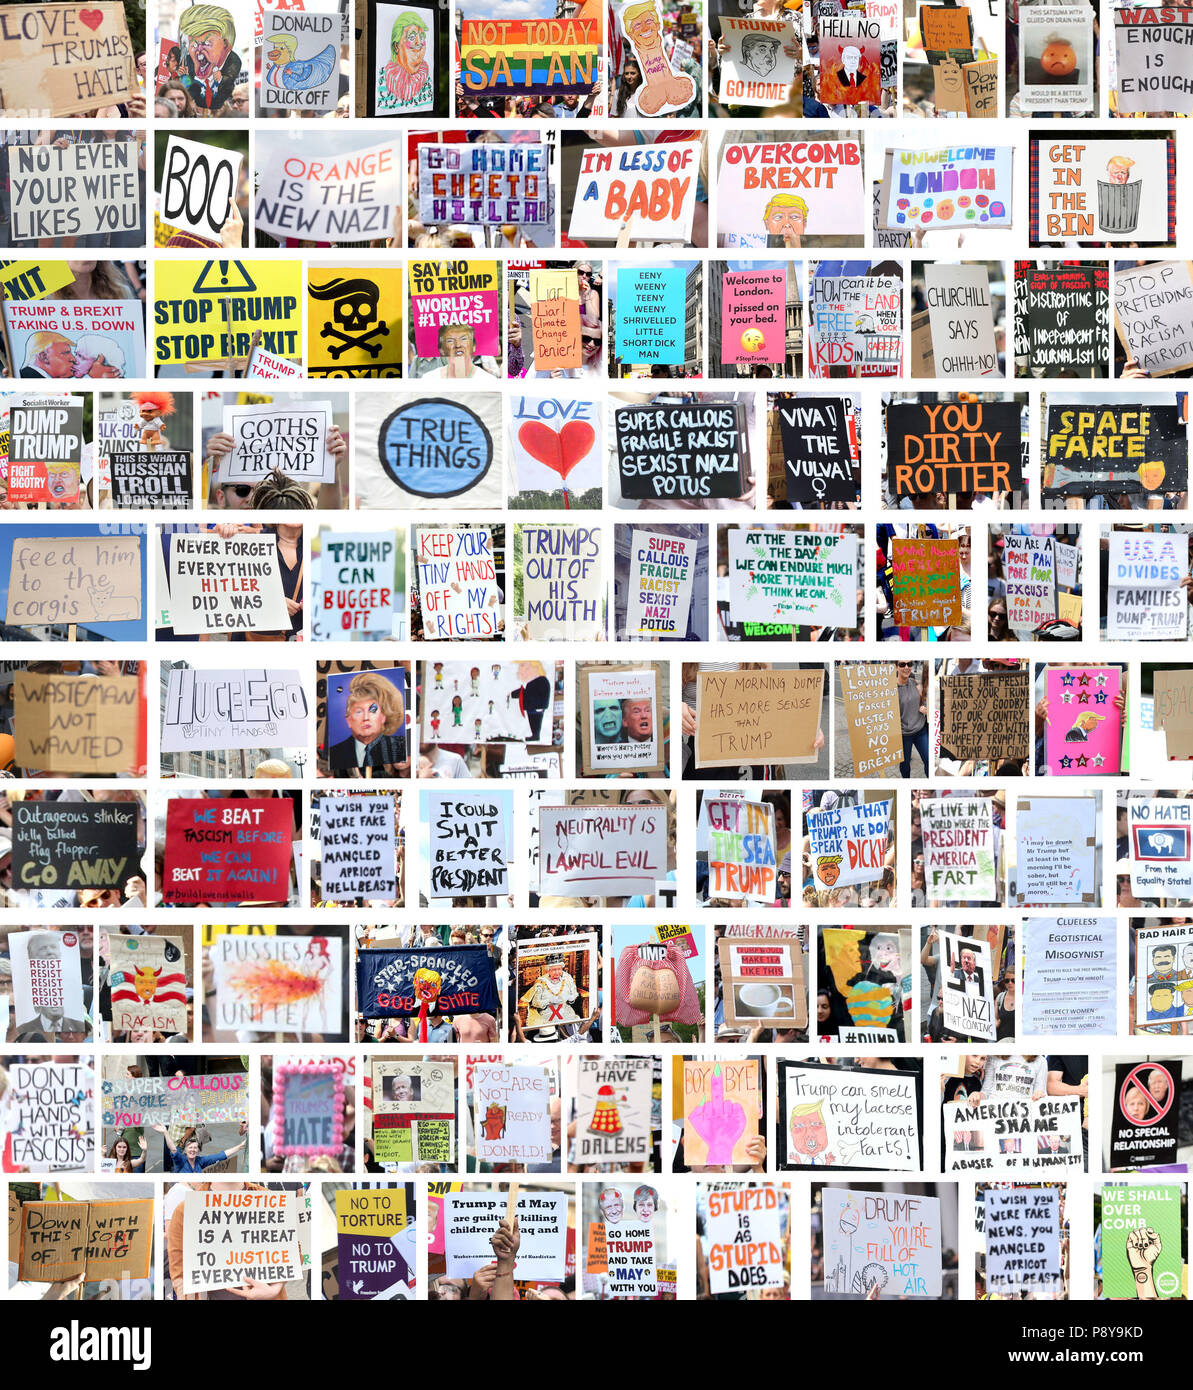 A composite image of 100 protest posters from throughout the UK, as part of the protests against the visit of US President Donald Trump. Stock Photo